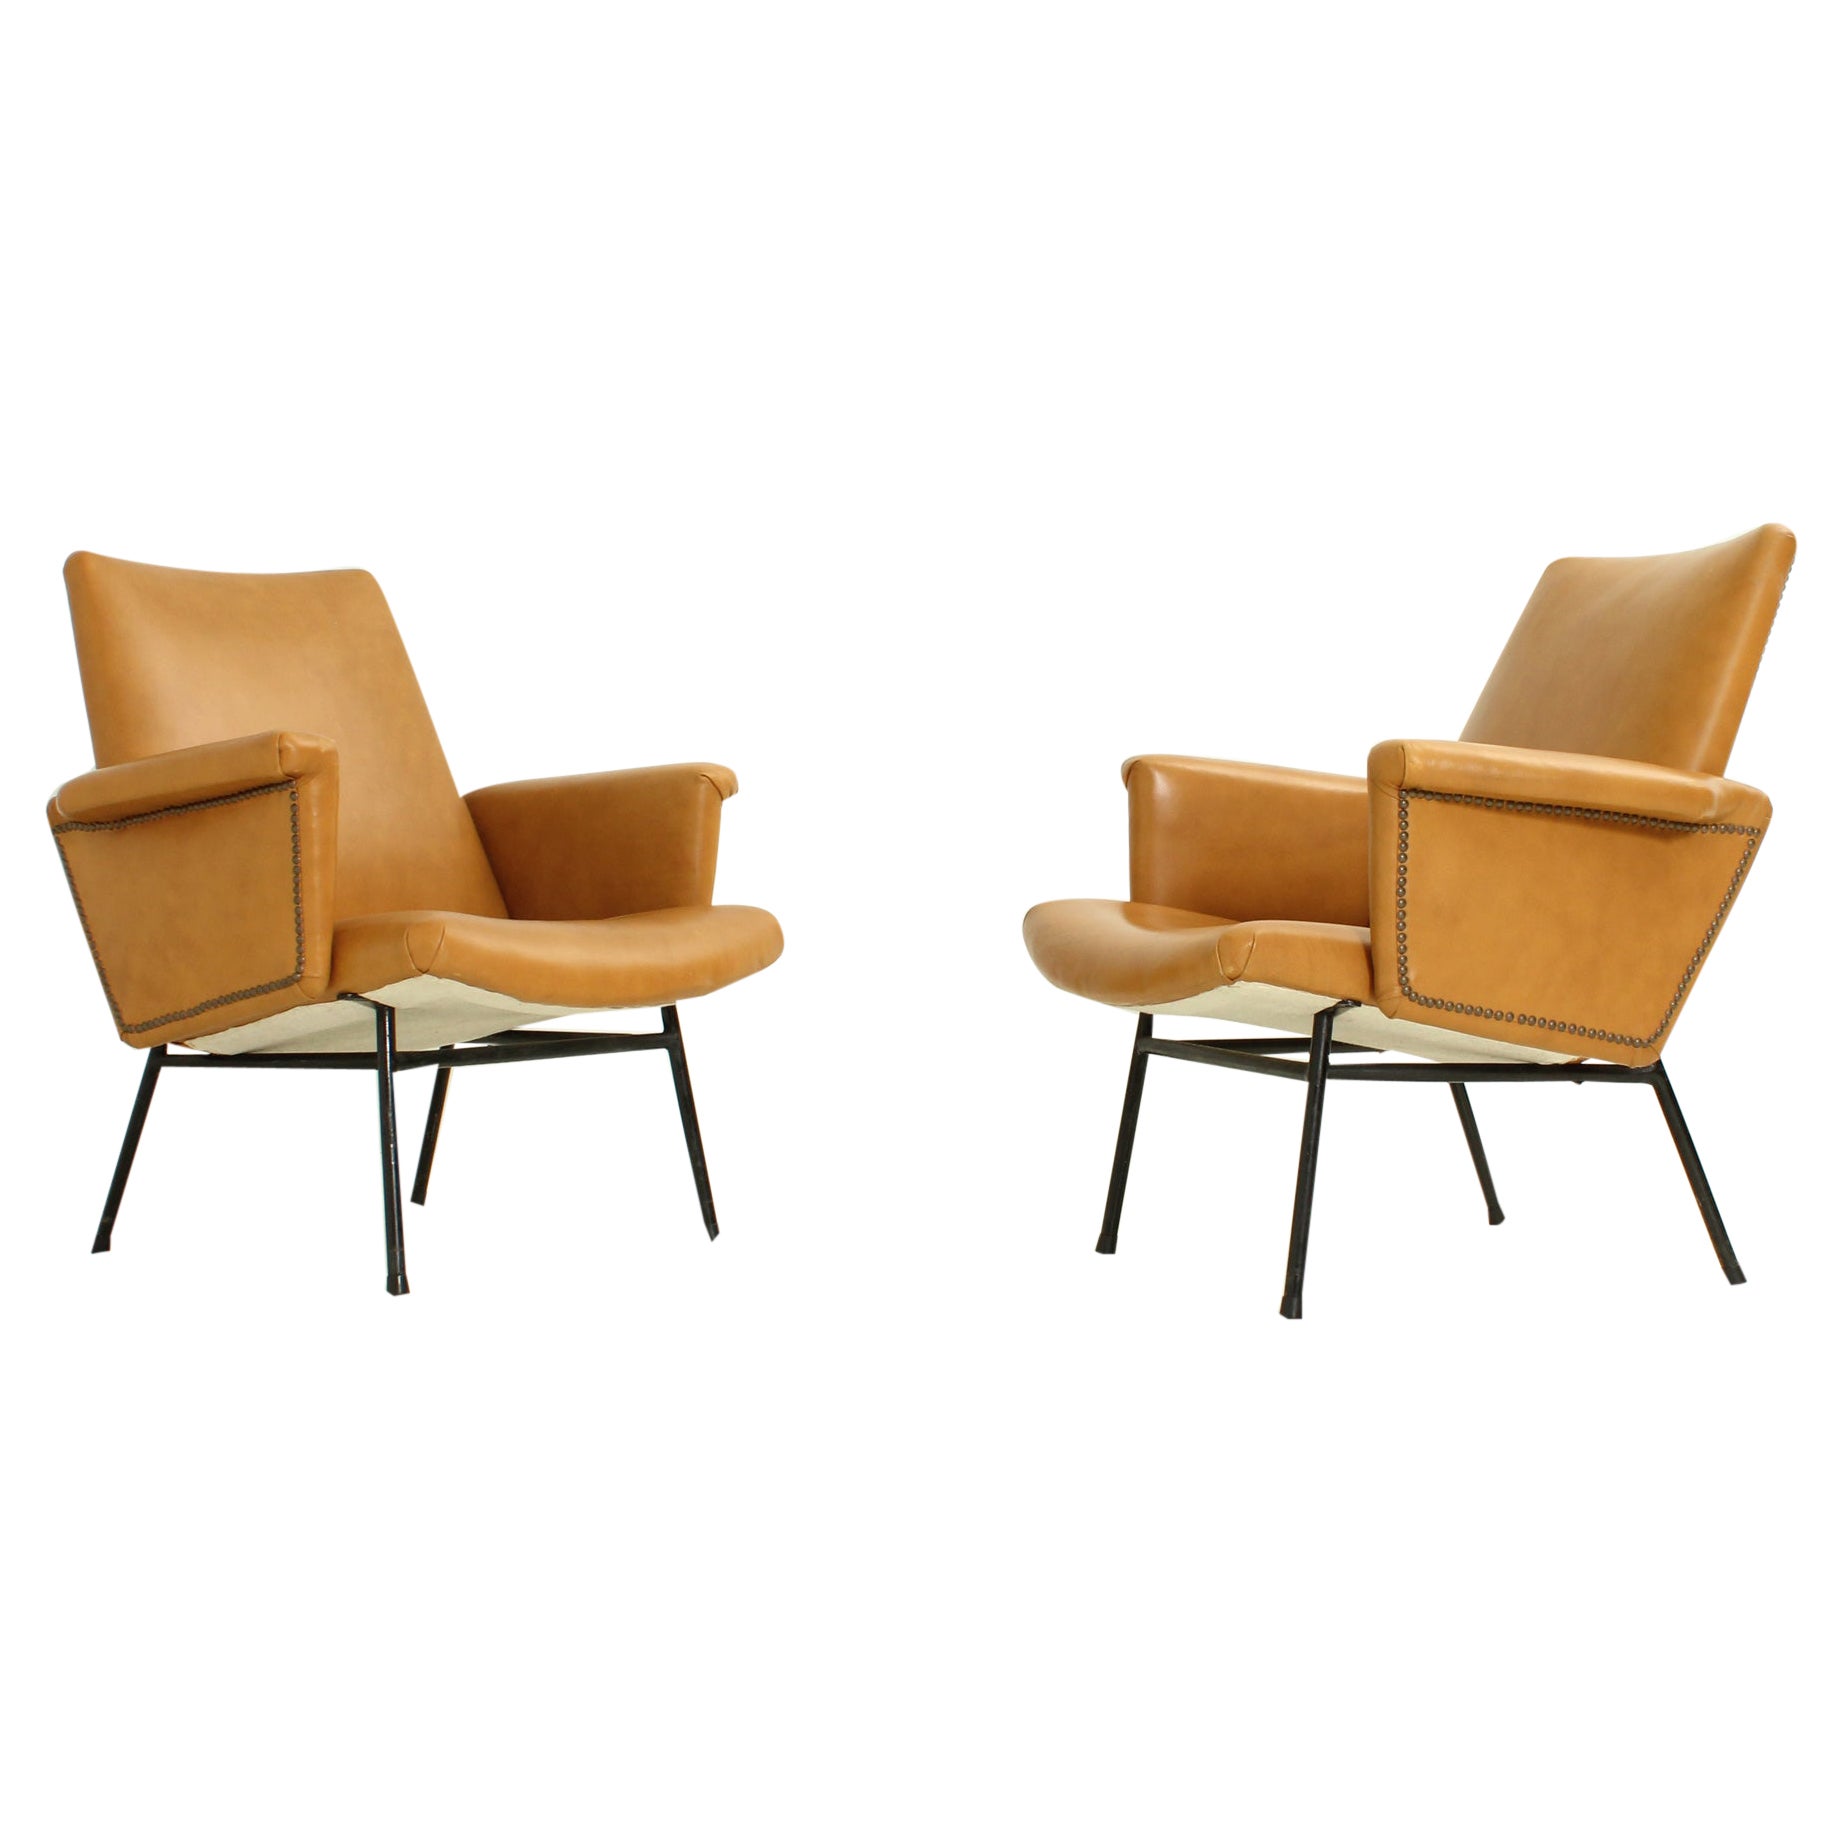 Pair of SK 660 Armchairs by Pierre Guariche for Steiner, 1953